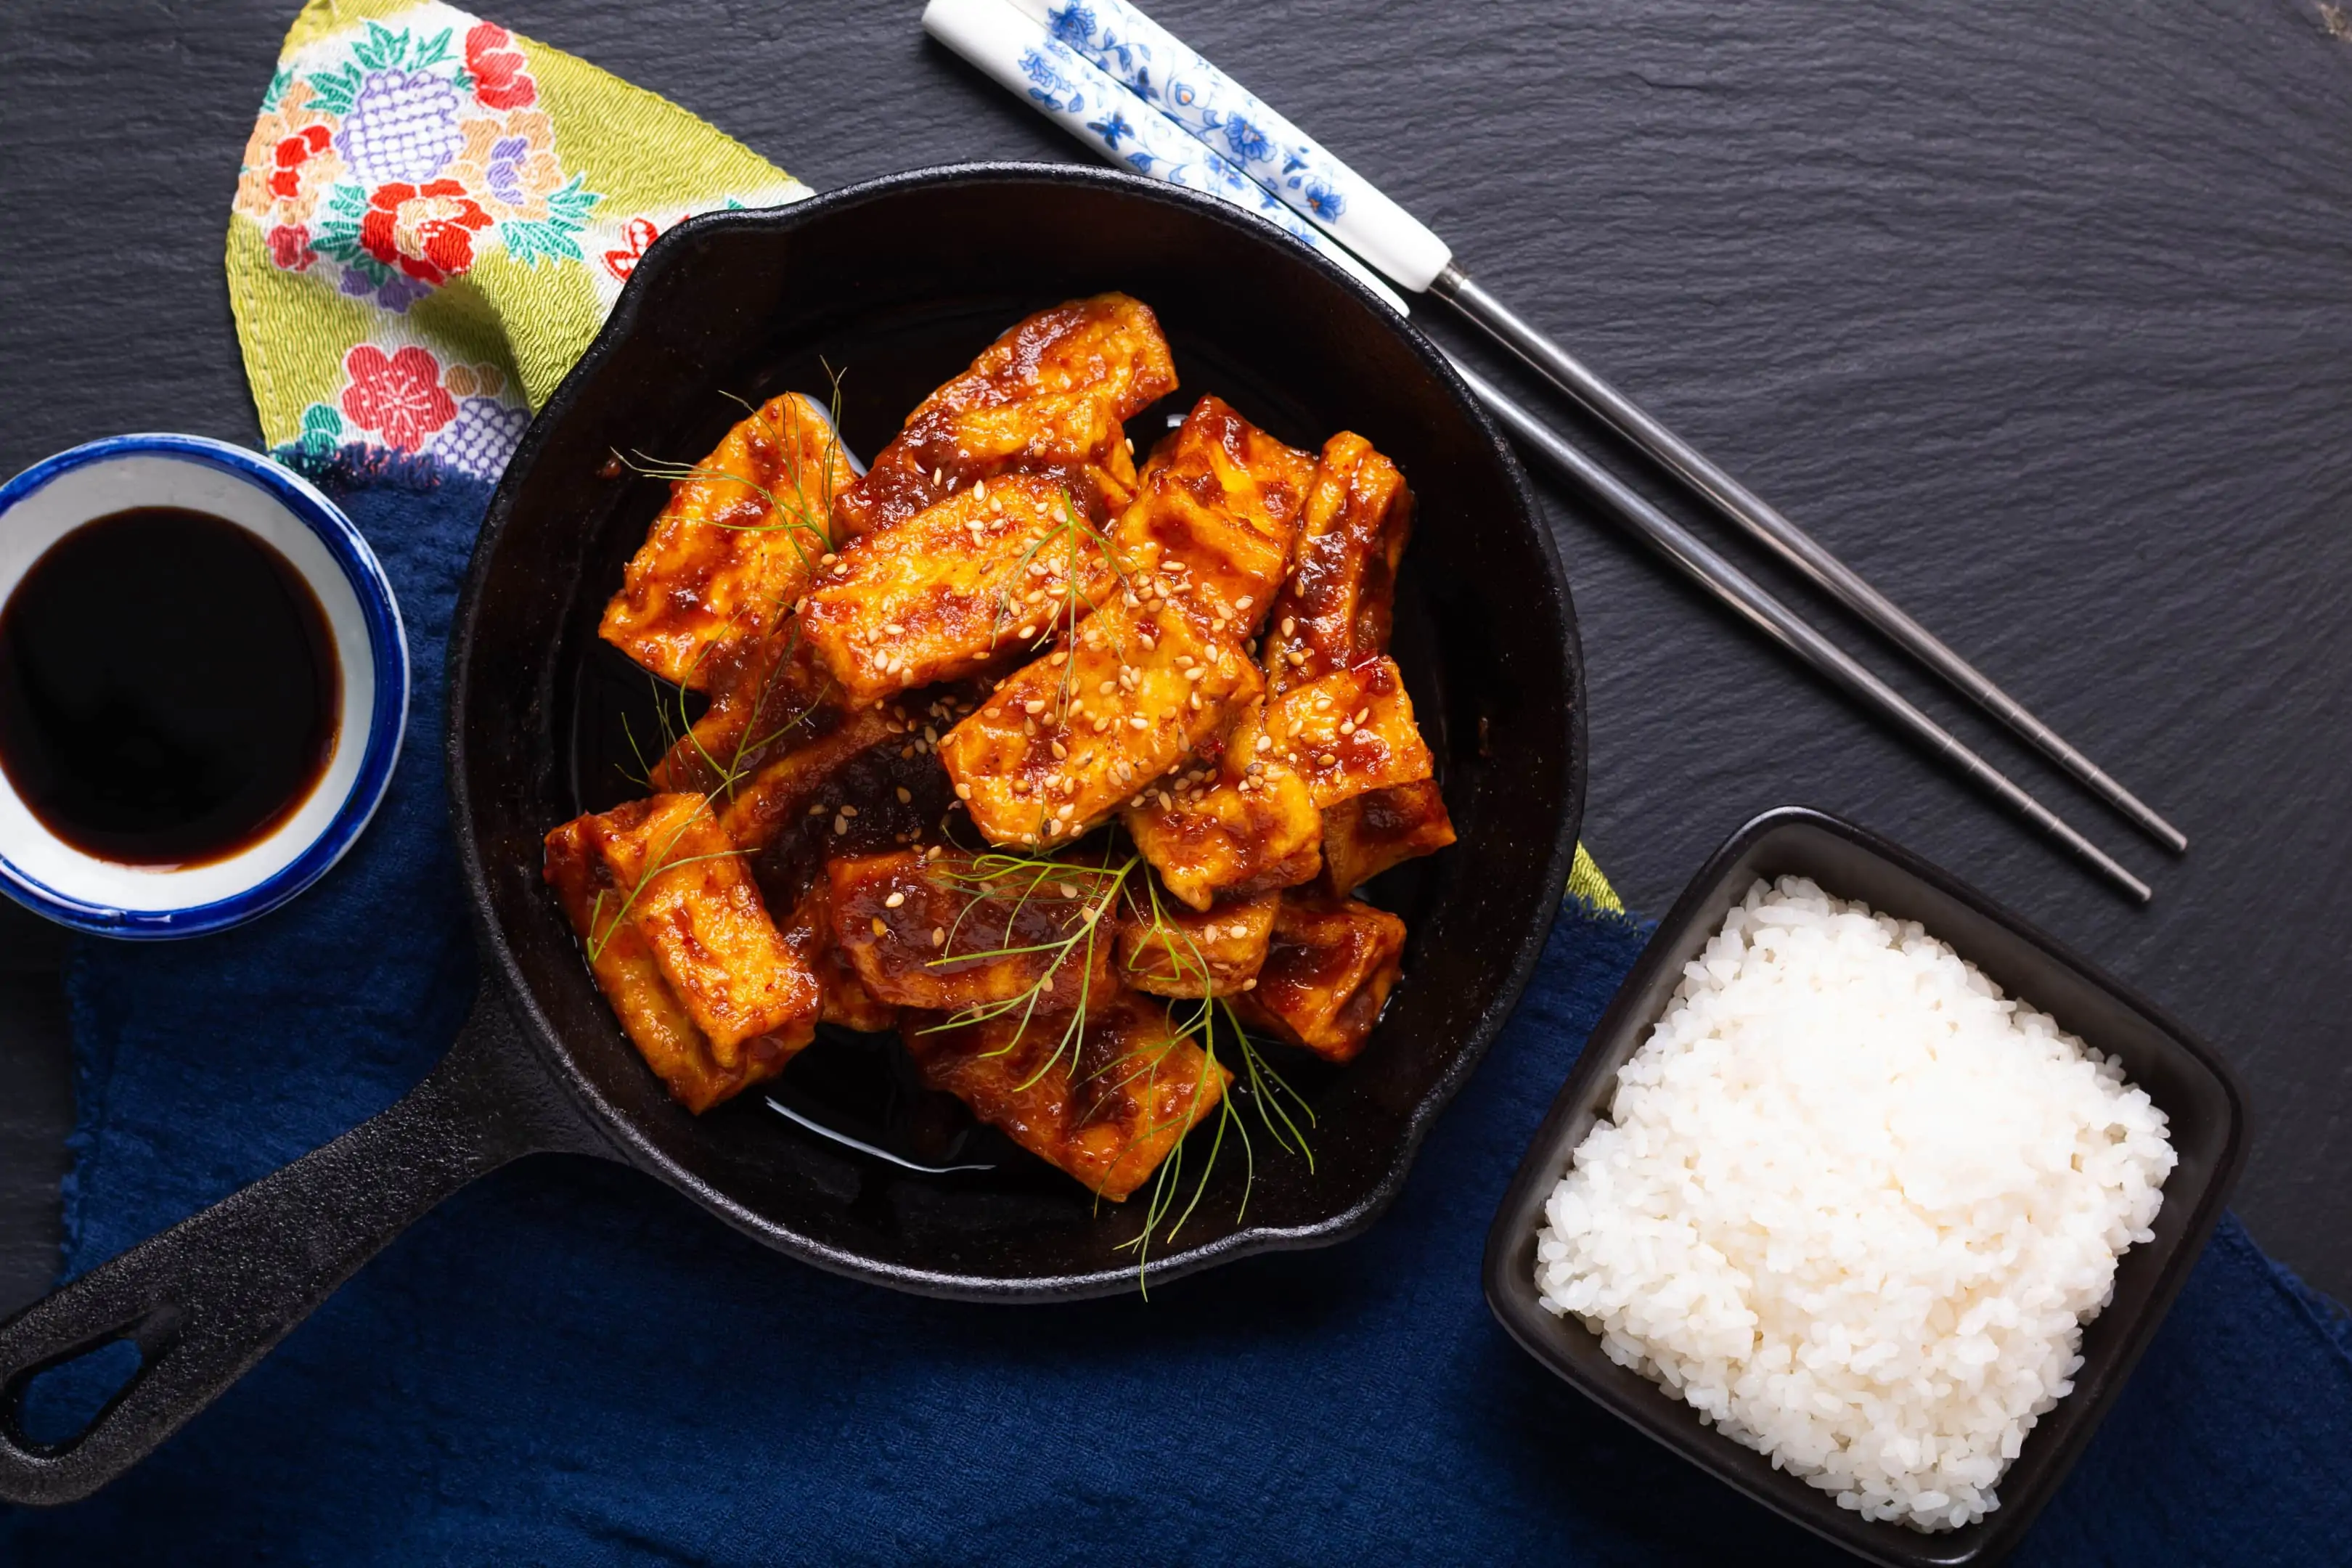 Homemade stir fried tofu with spicy chili sauce served with rice